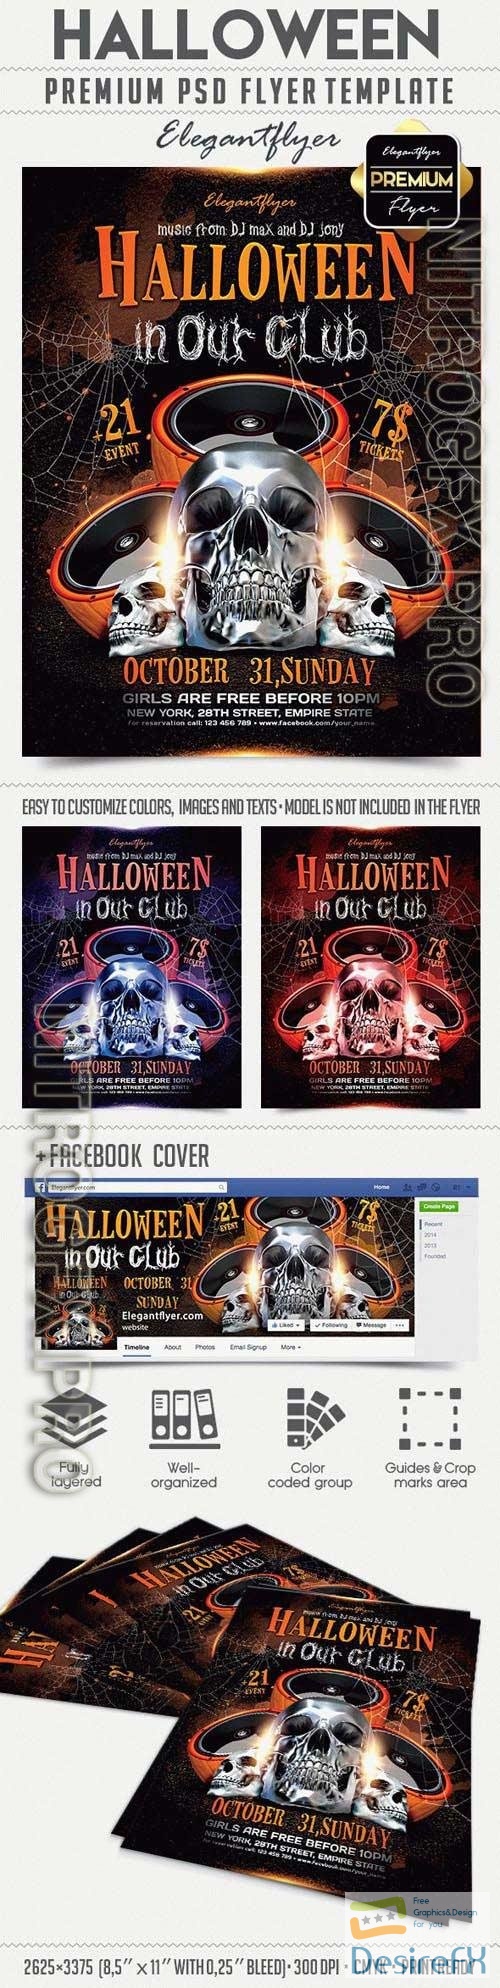 Halloween in Our Club Flyer PSD Template